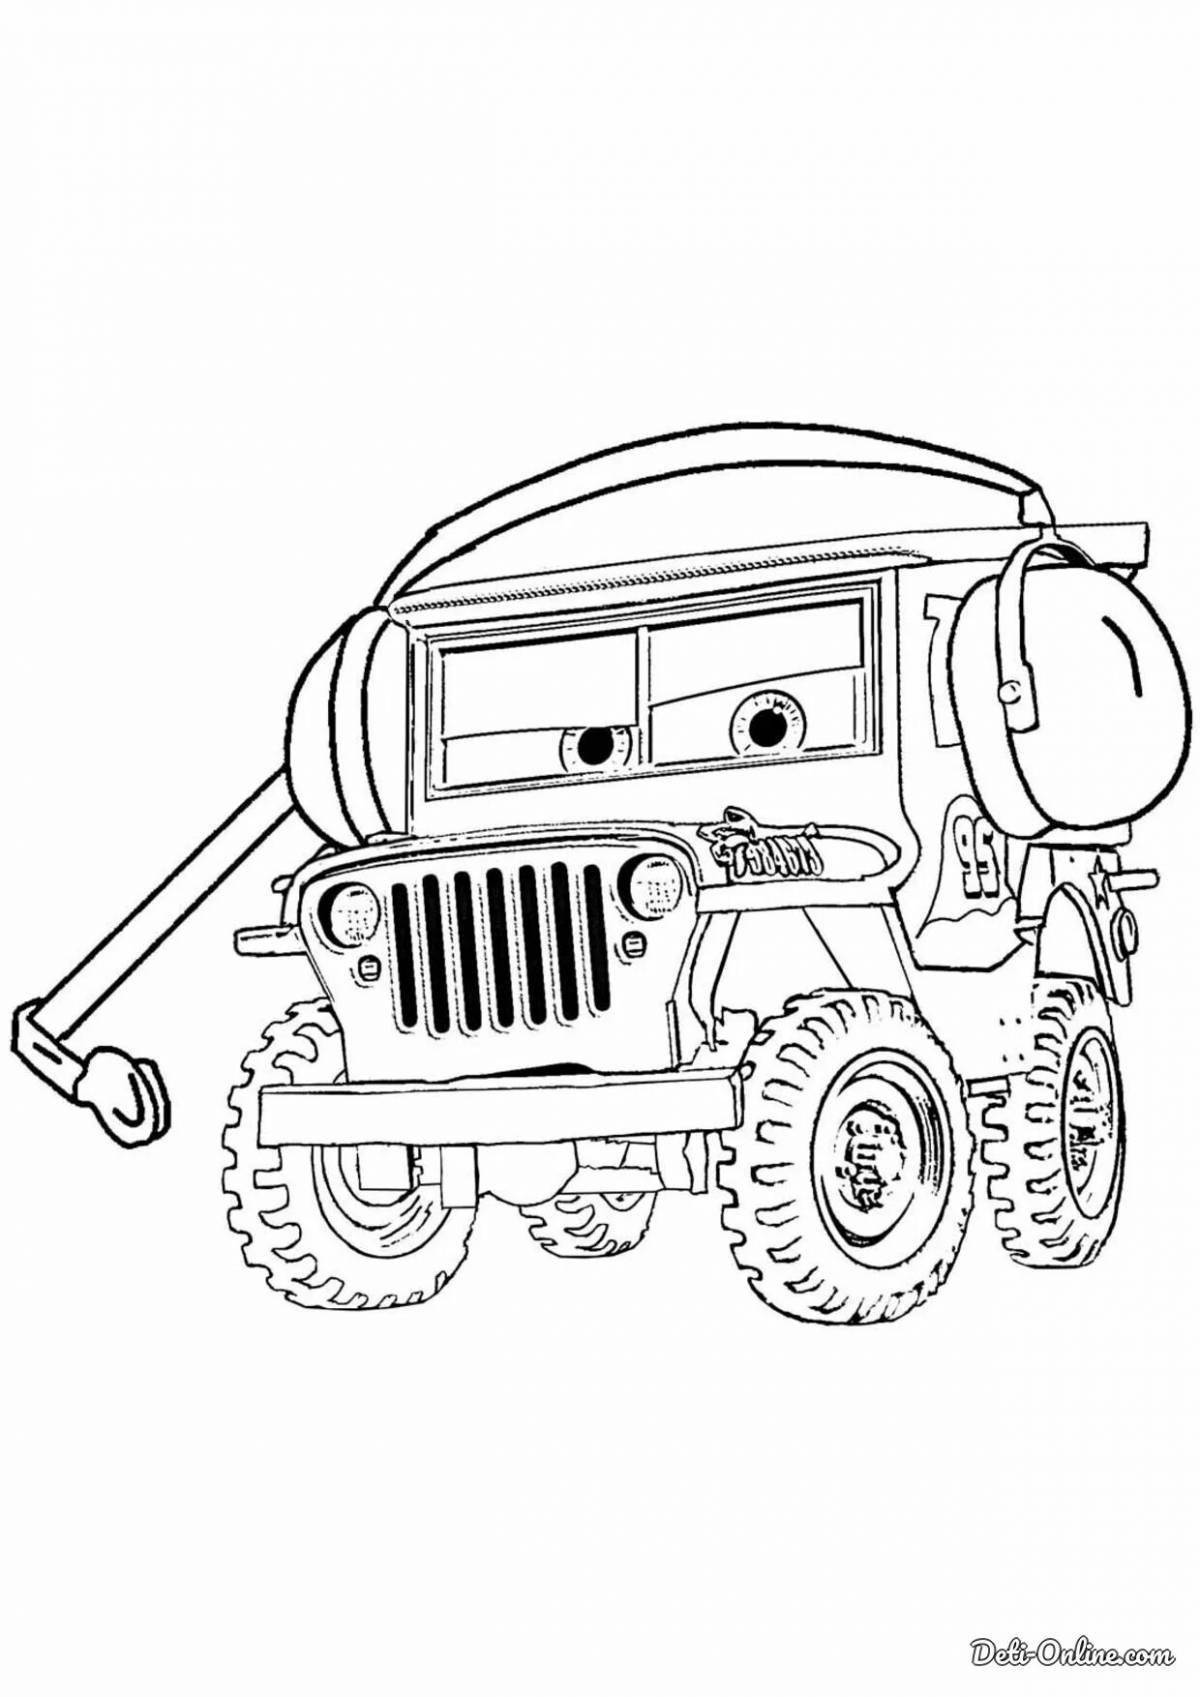 Coloring page delightful sheriff's car